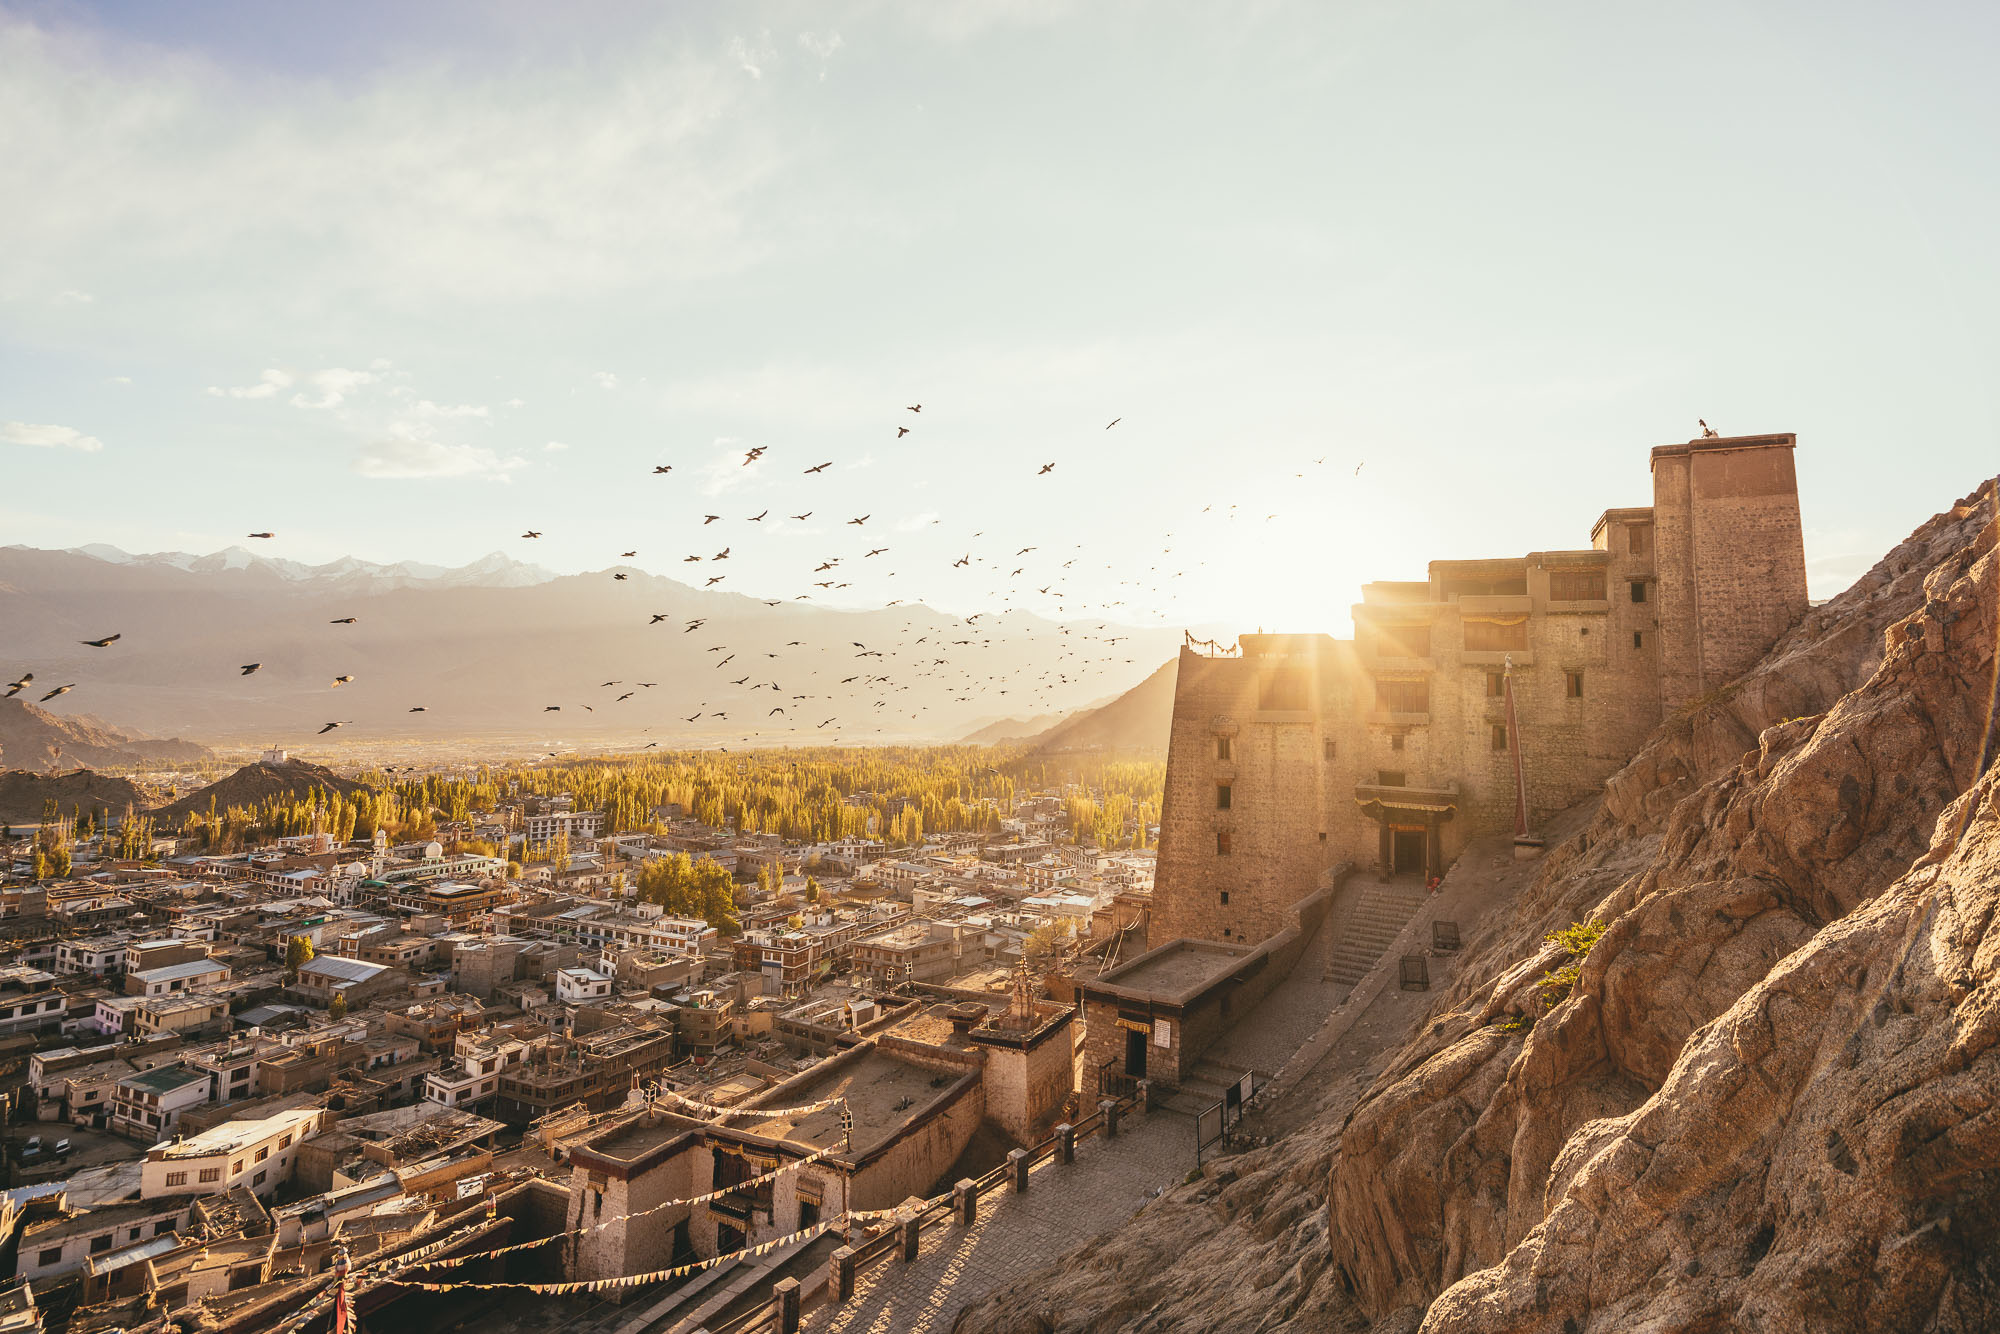 Setting sun over Leh Palace, ladakh district of northern India